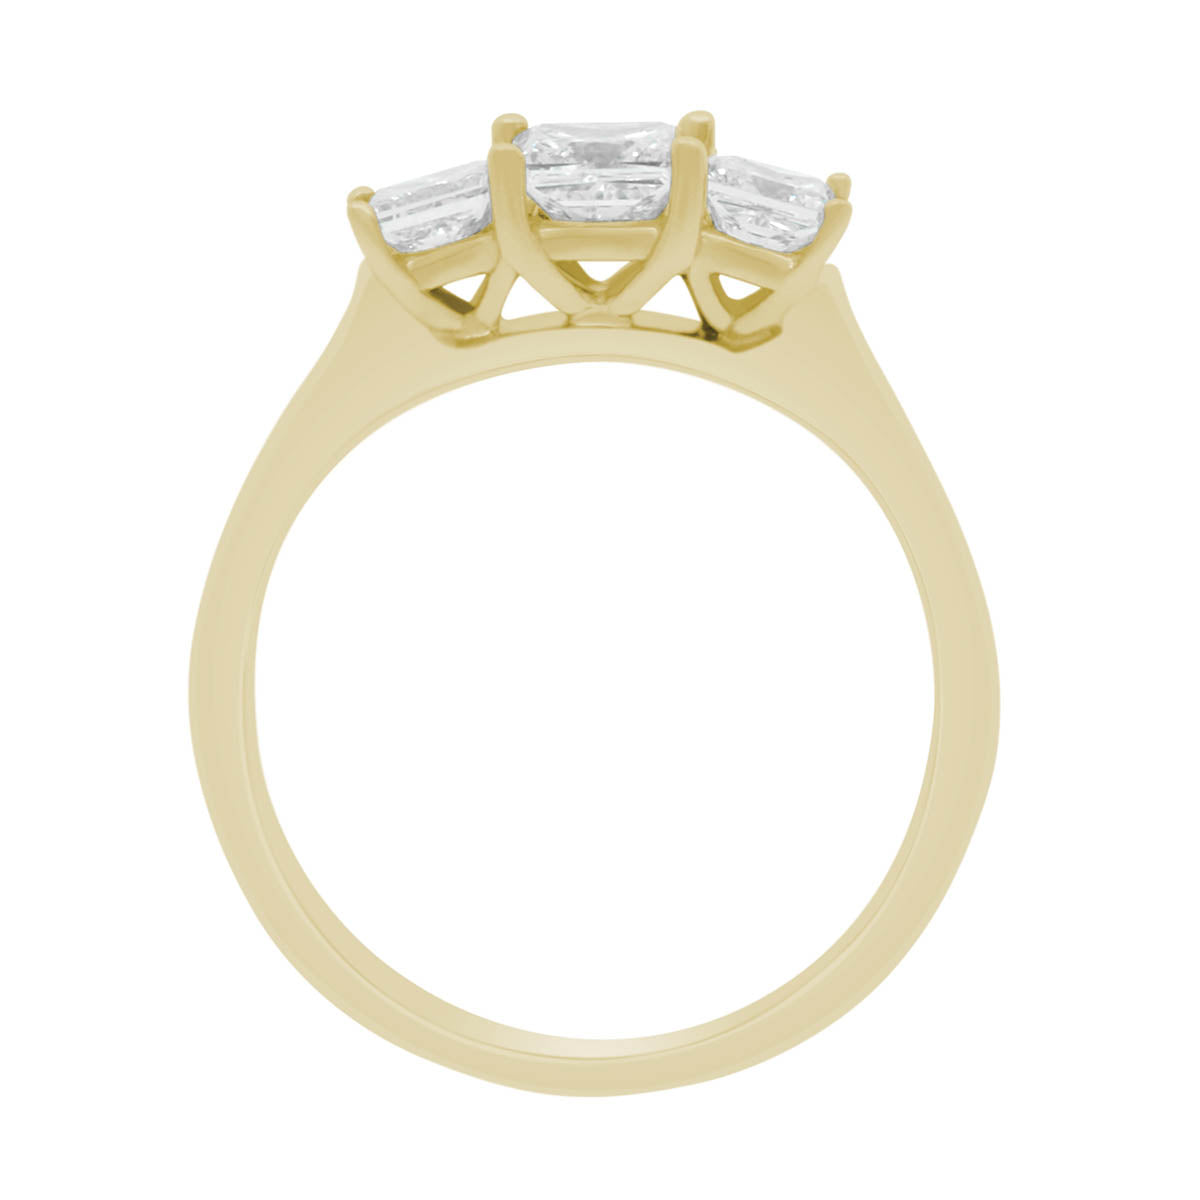 Princess Cut Trilogy Engagement Ring in yellow gold standing upright